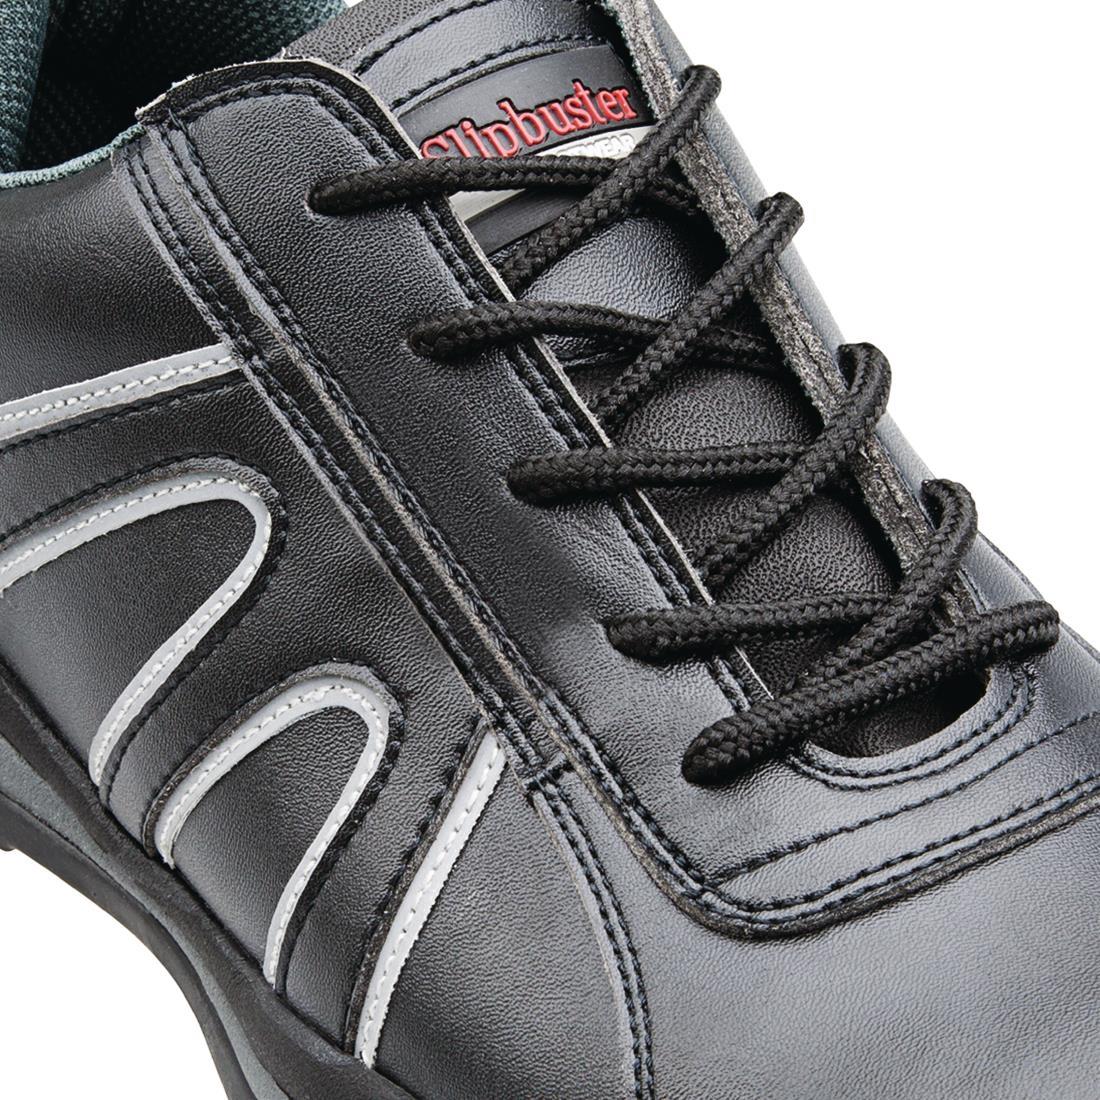 Slipbuster Safety Trainers Black 42 - A708-42  - 3